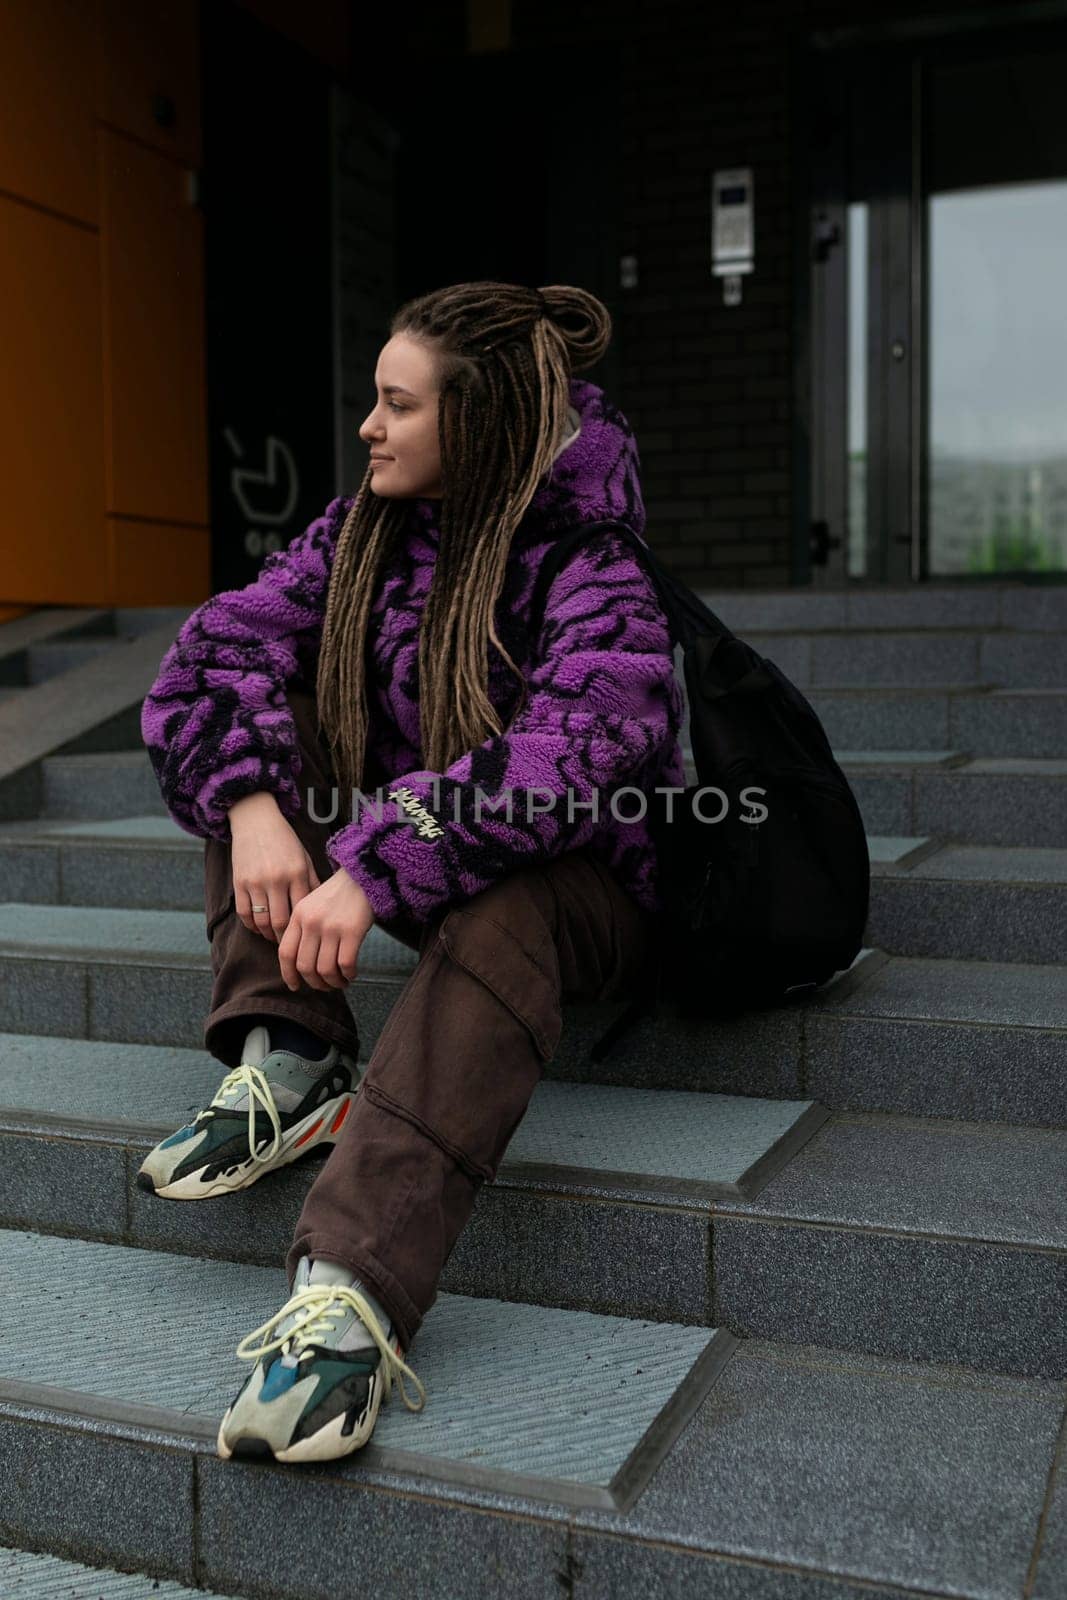 Beautiful young woman with dreadlocks and piercings walks through the city.